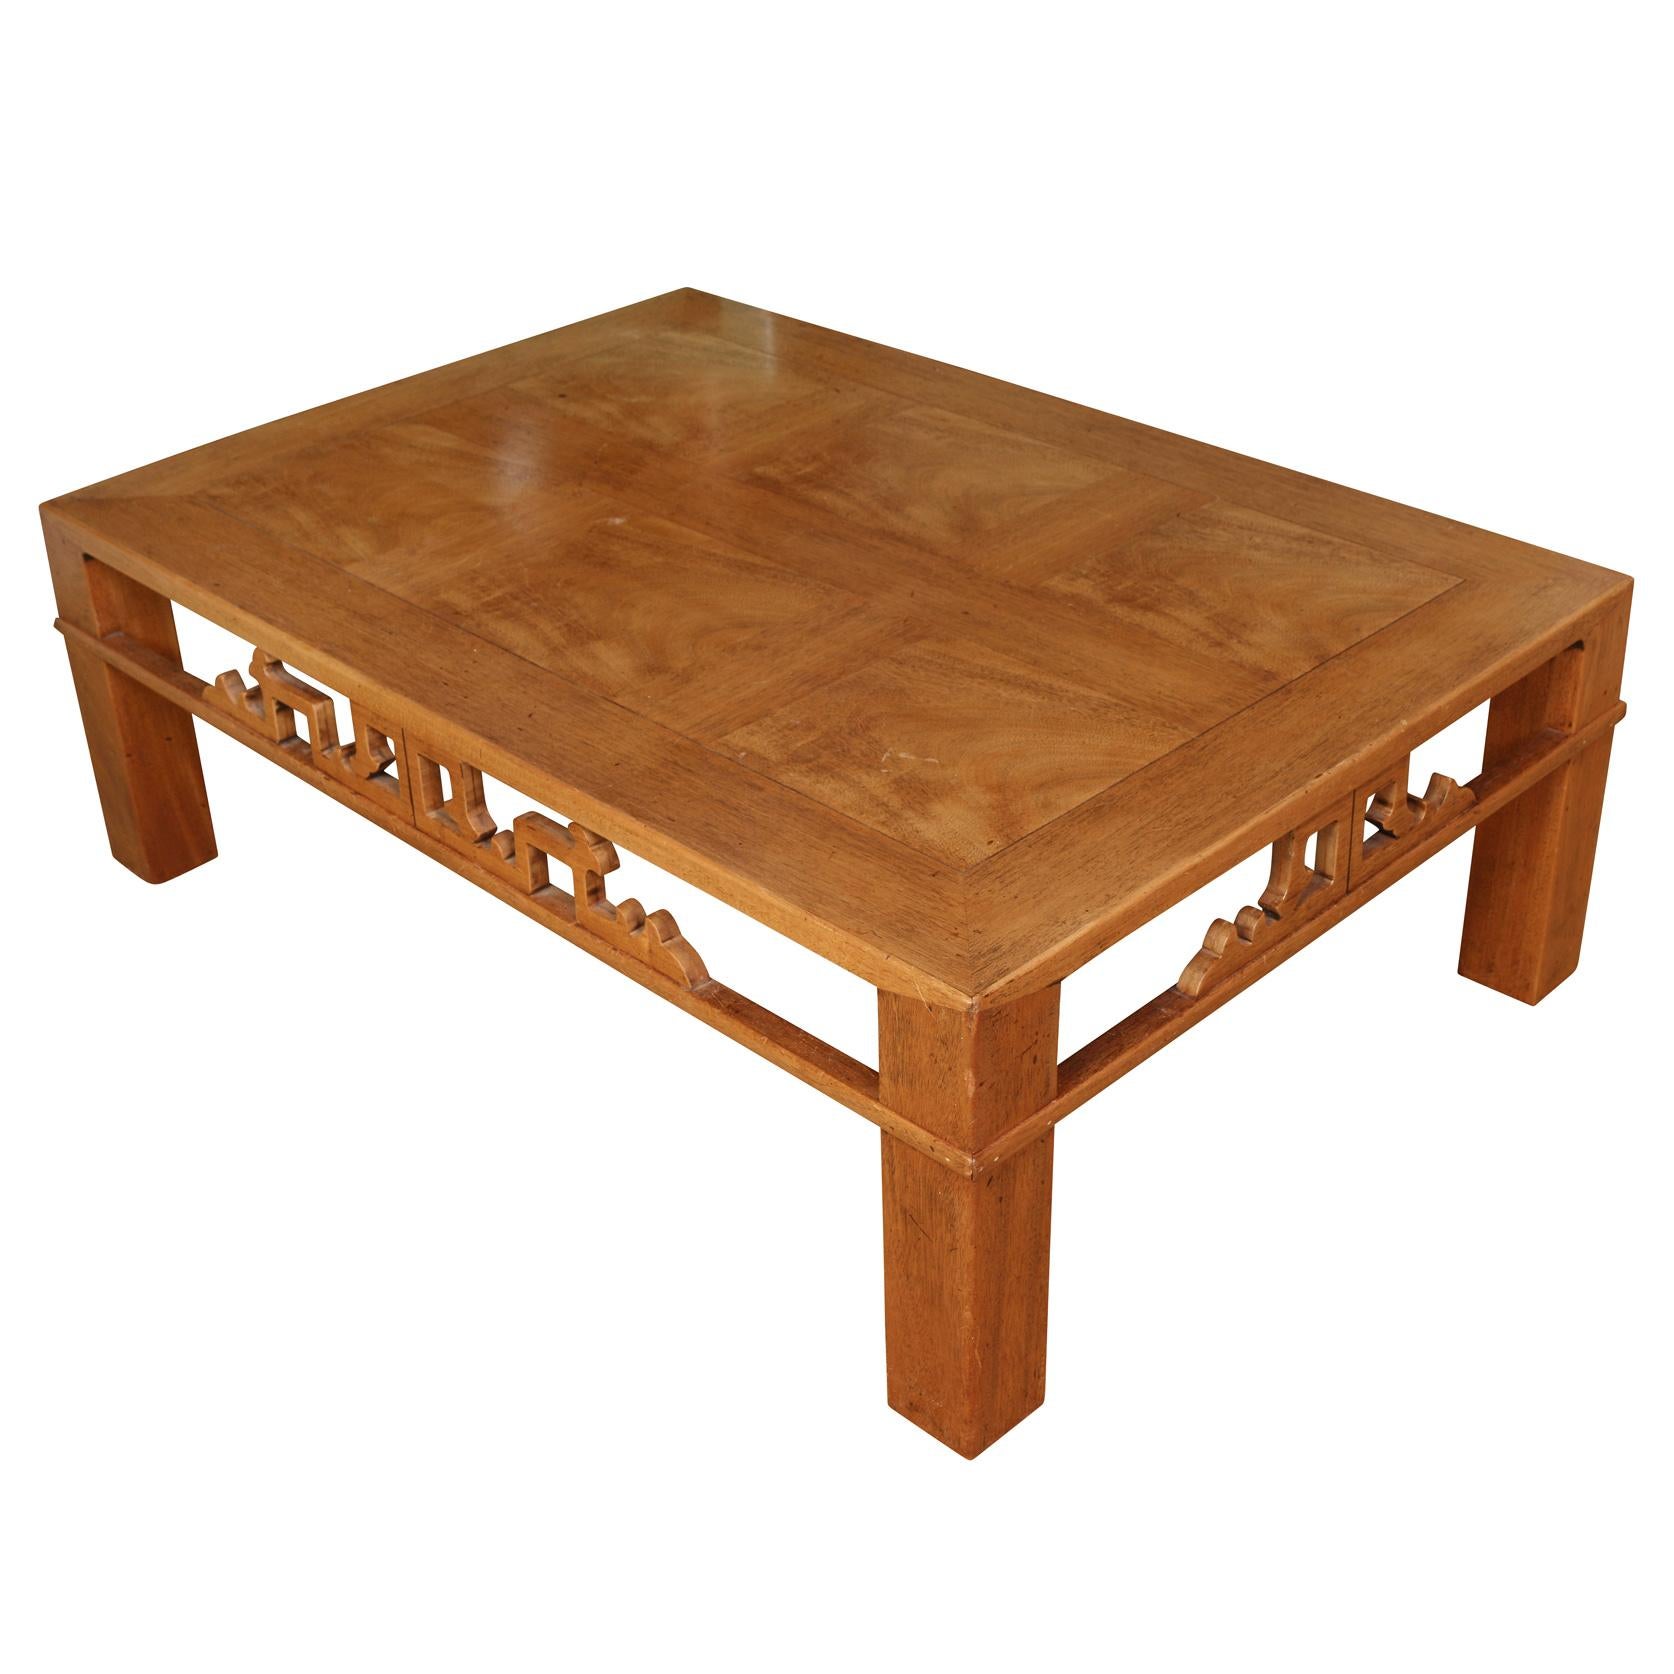 A vintage Asian style low coffee table with carved apron and square parquetry top design.